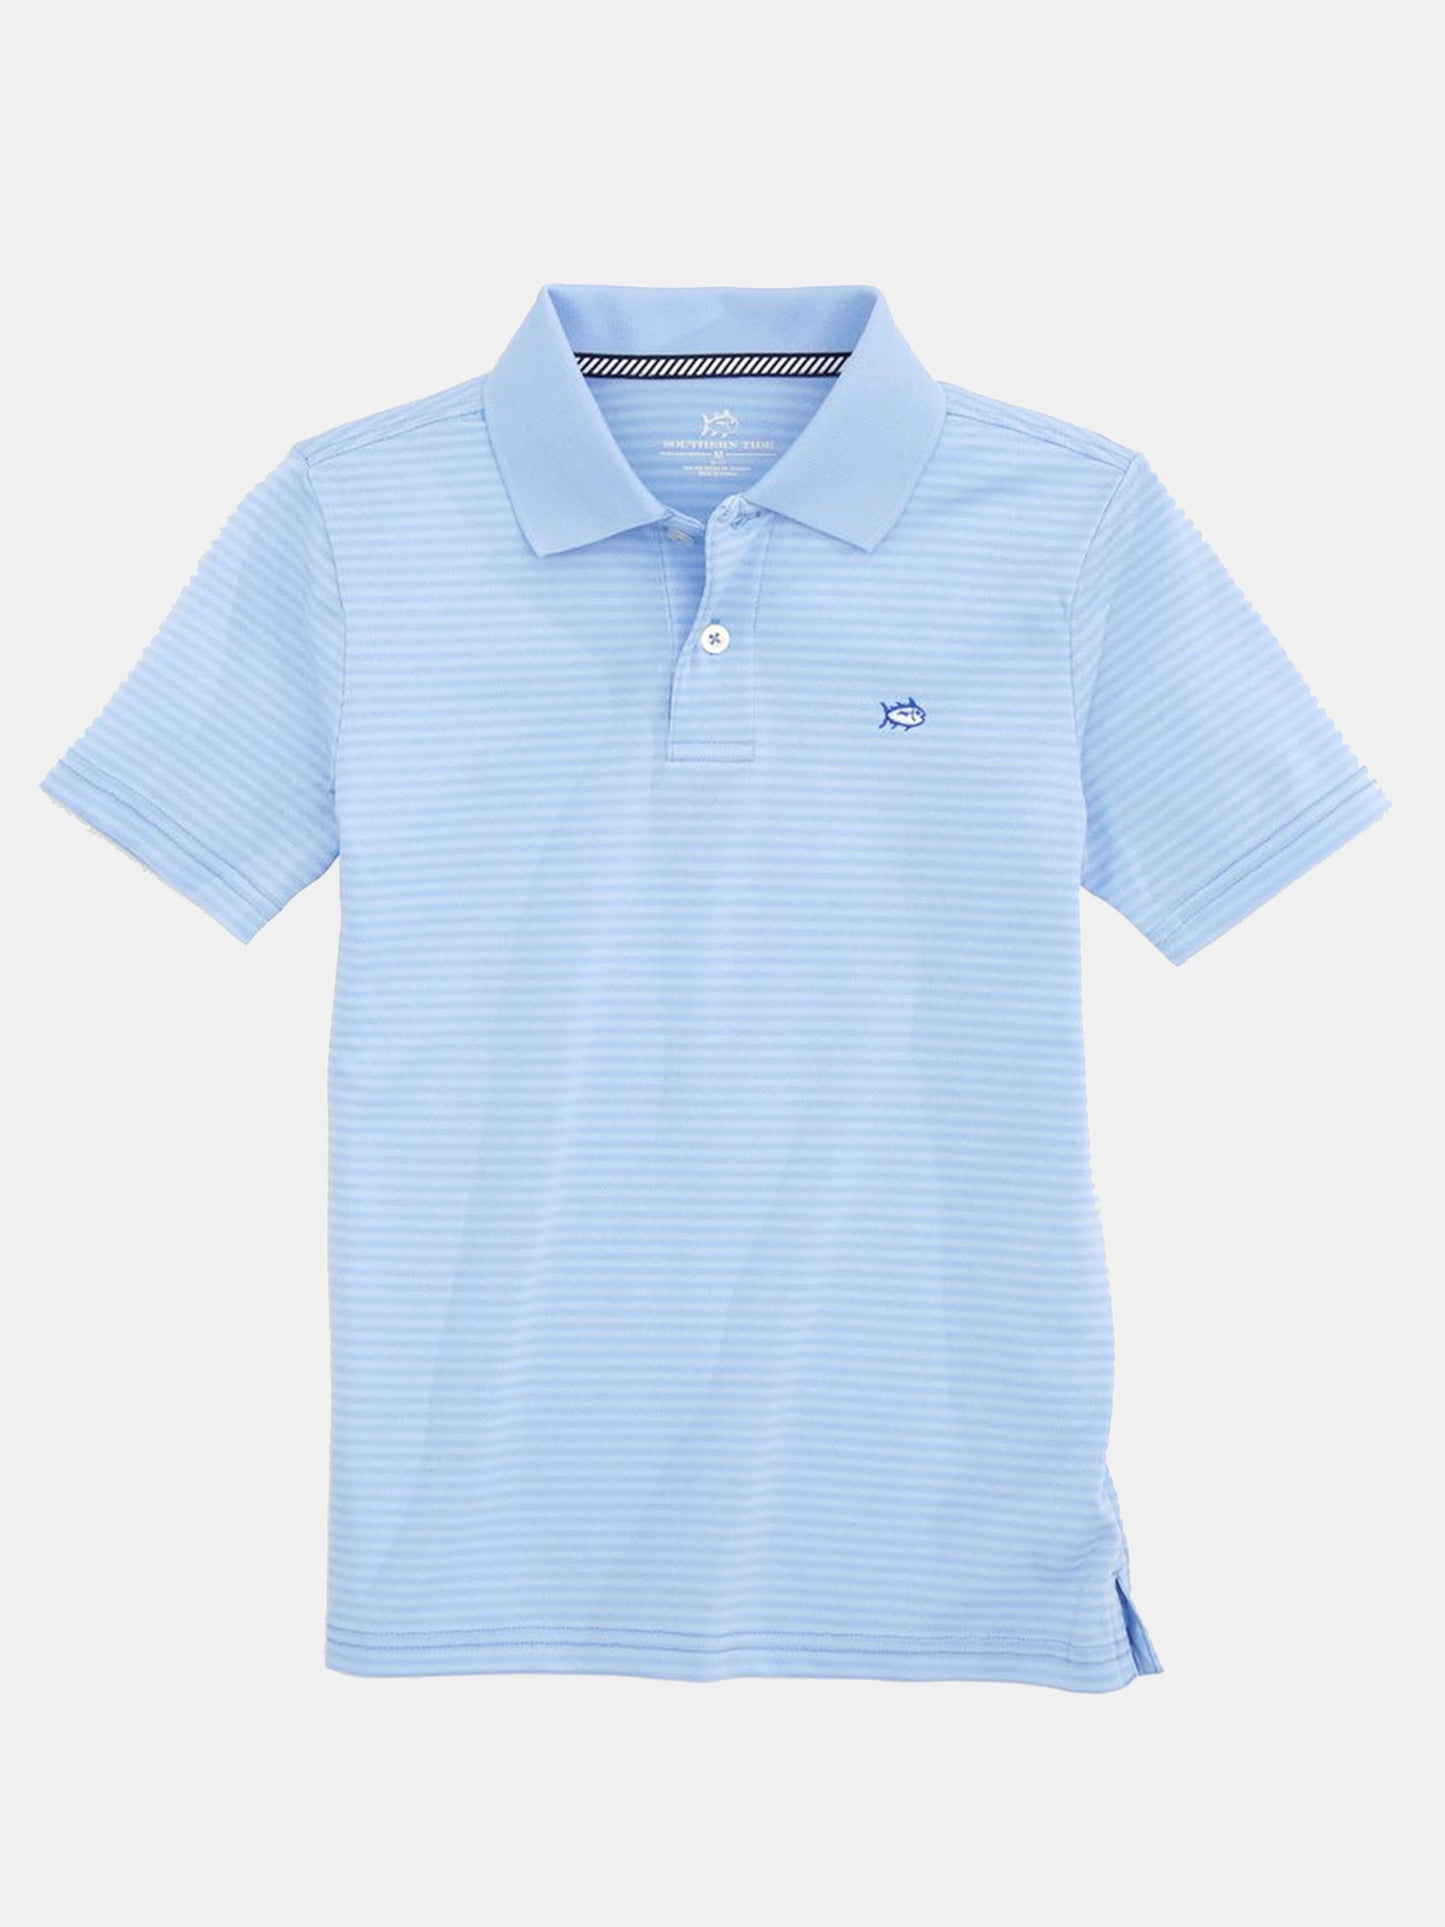 Southern Tide Boys' Roster Striped Performance Polo Shirt